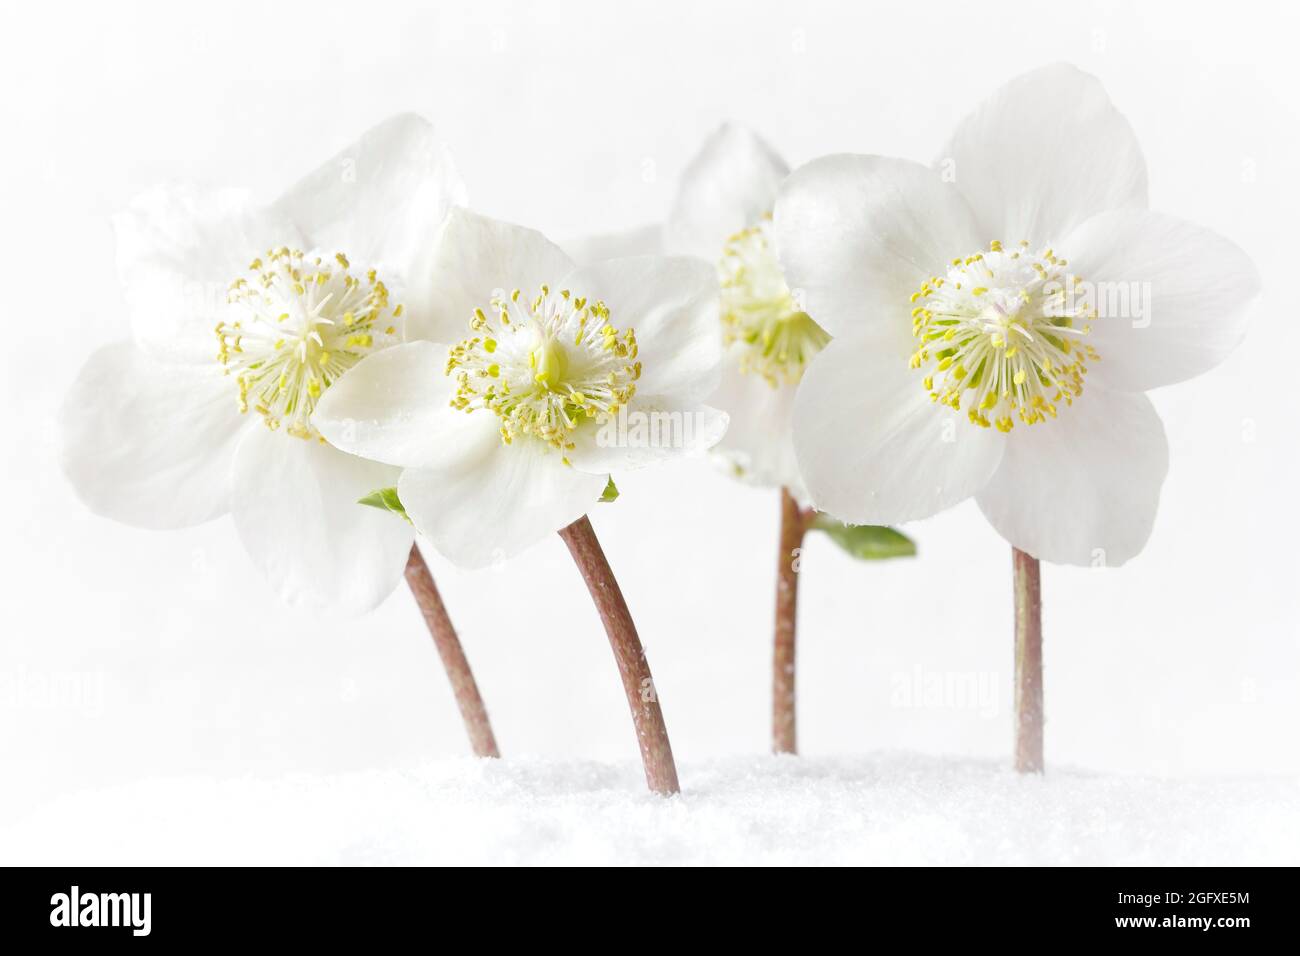 4 white hellebores flowers in snow, close-up floral winter background for nonreligious seasons greetings. Stock Photo